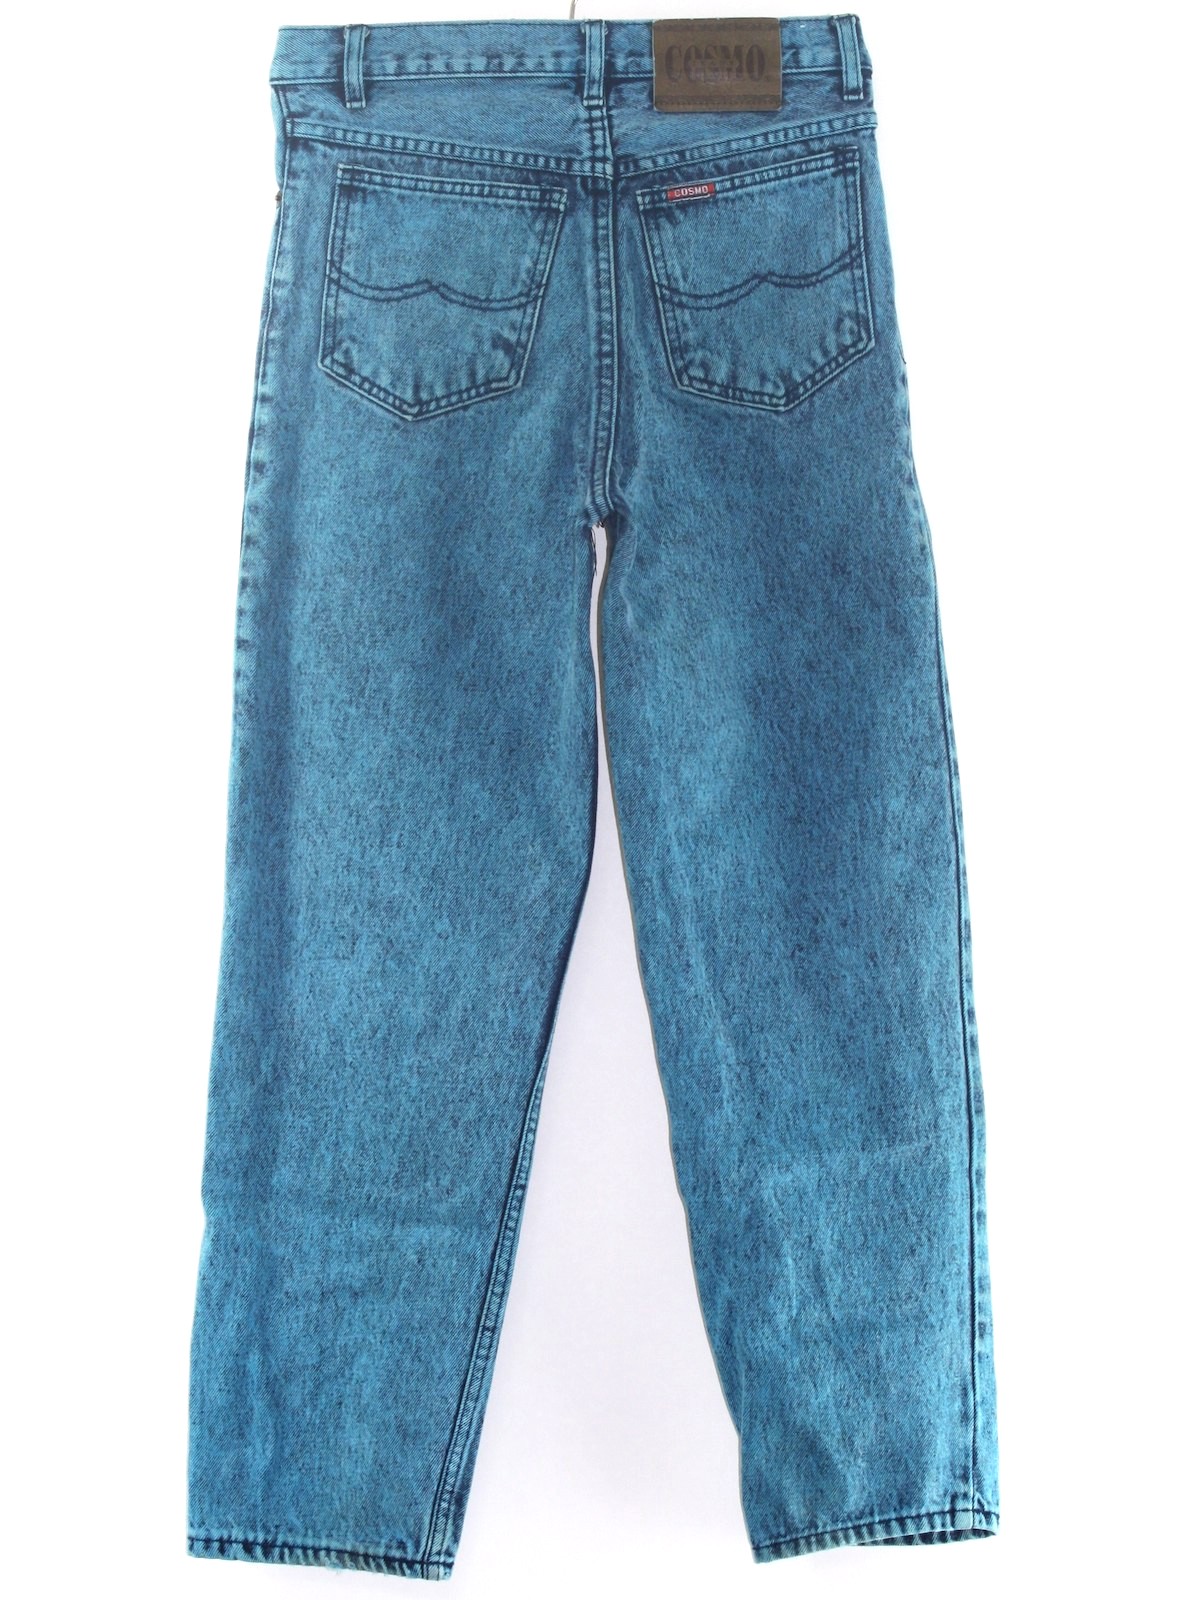 Retro 80's Pants: 80s -Cosmo- Womens teal blue background stone washed ...